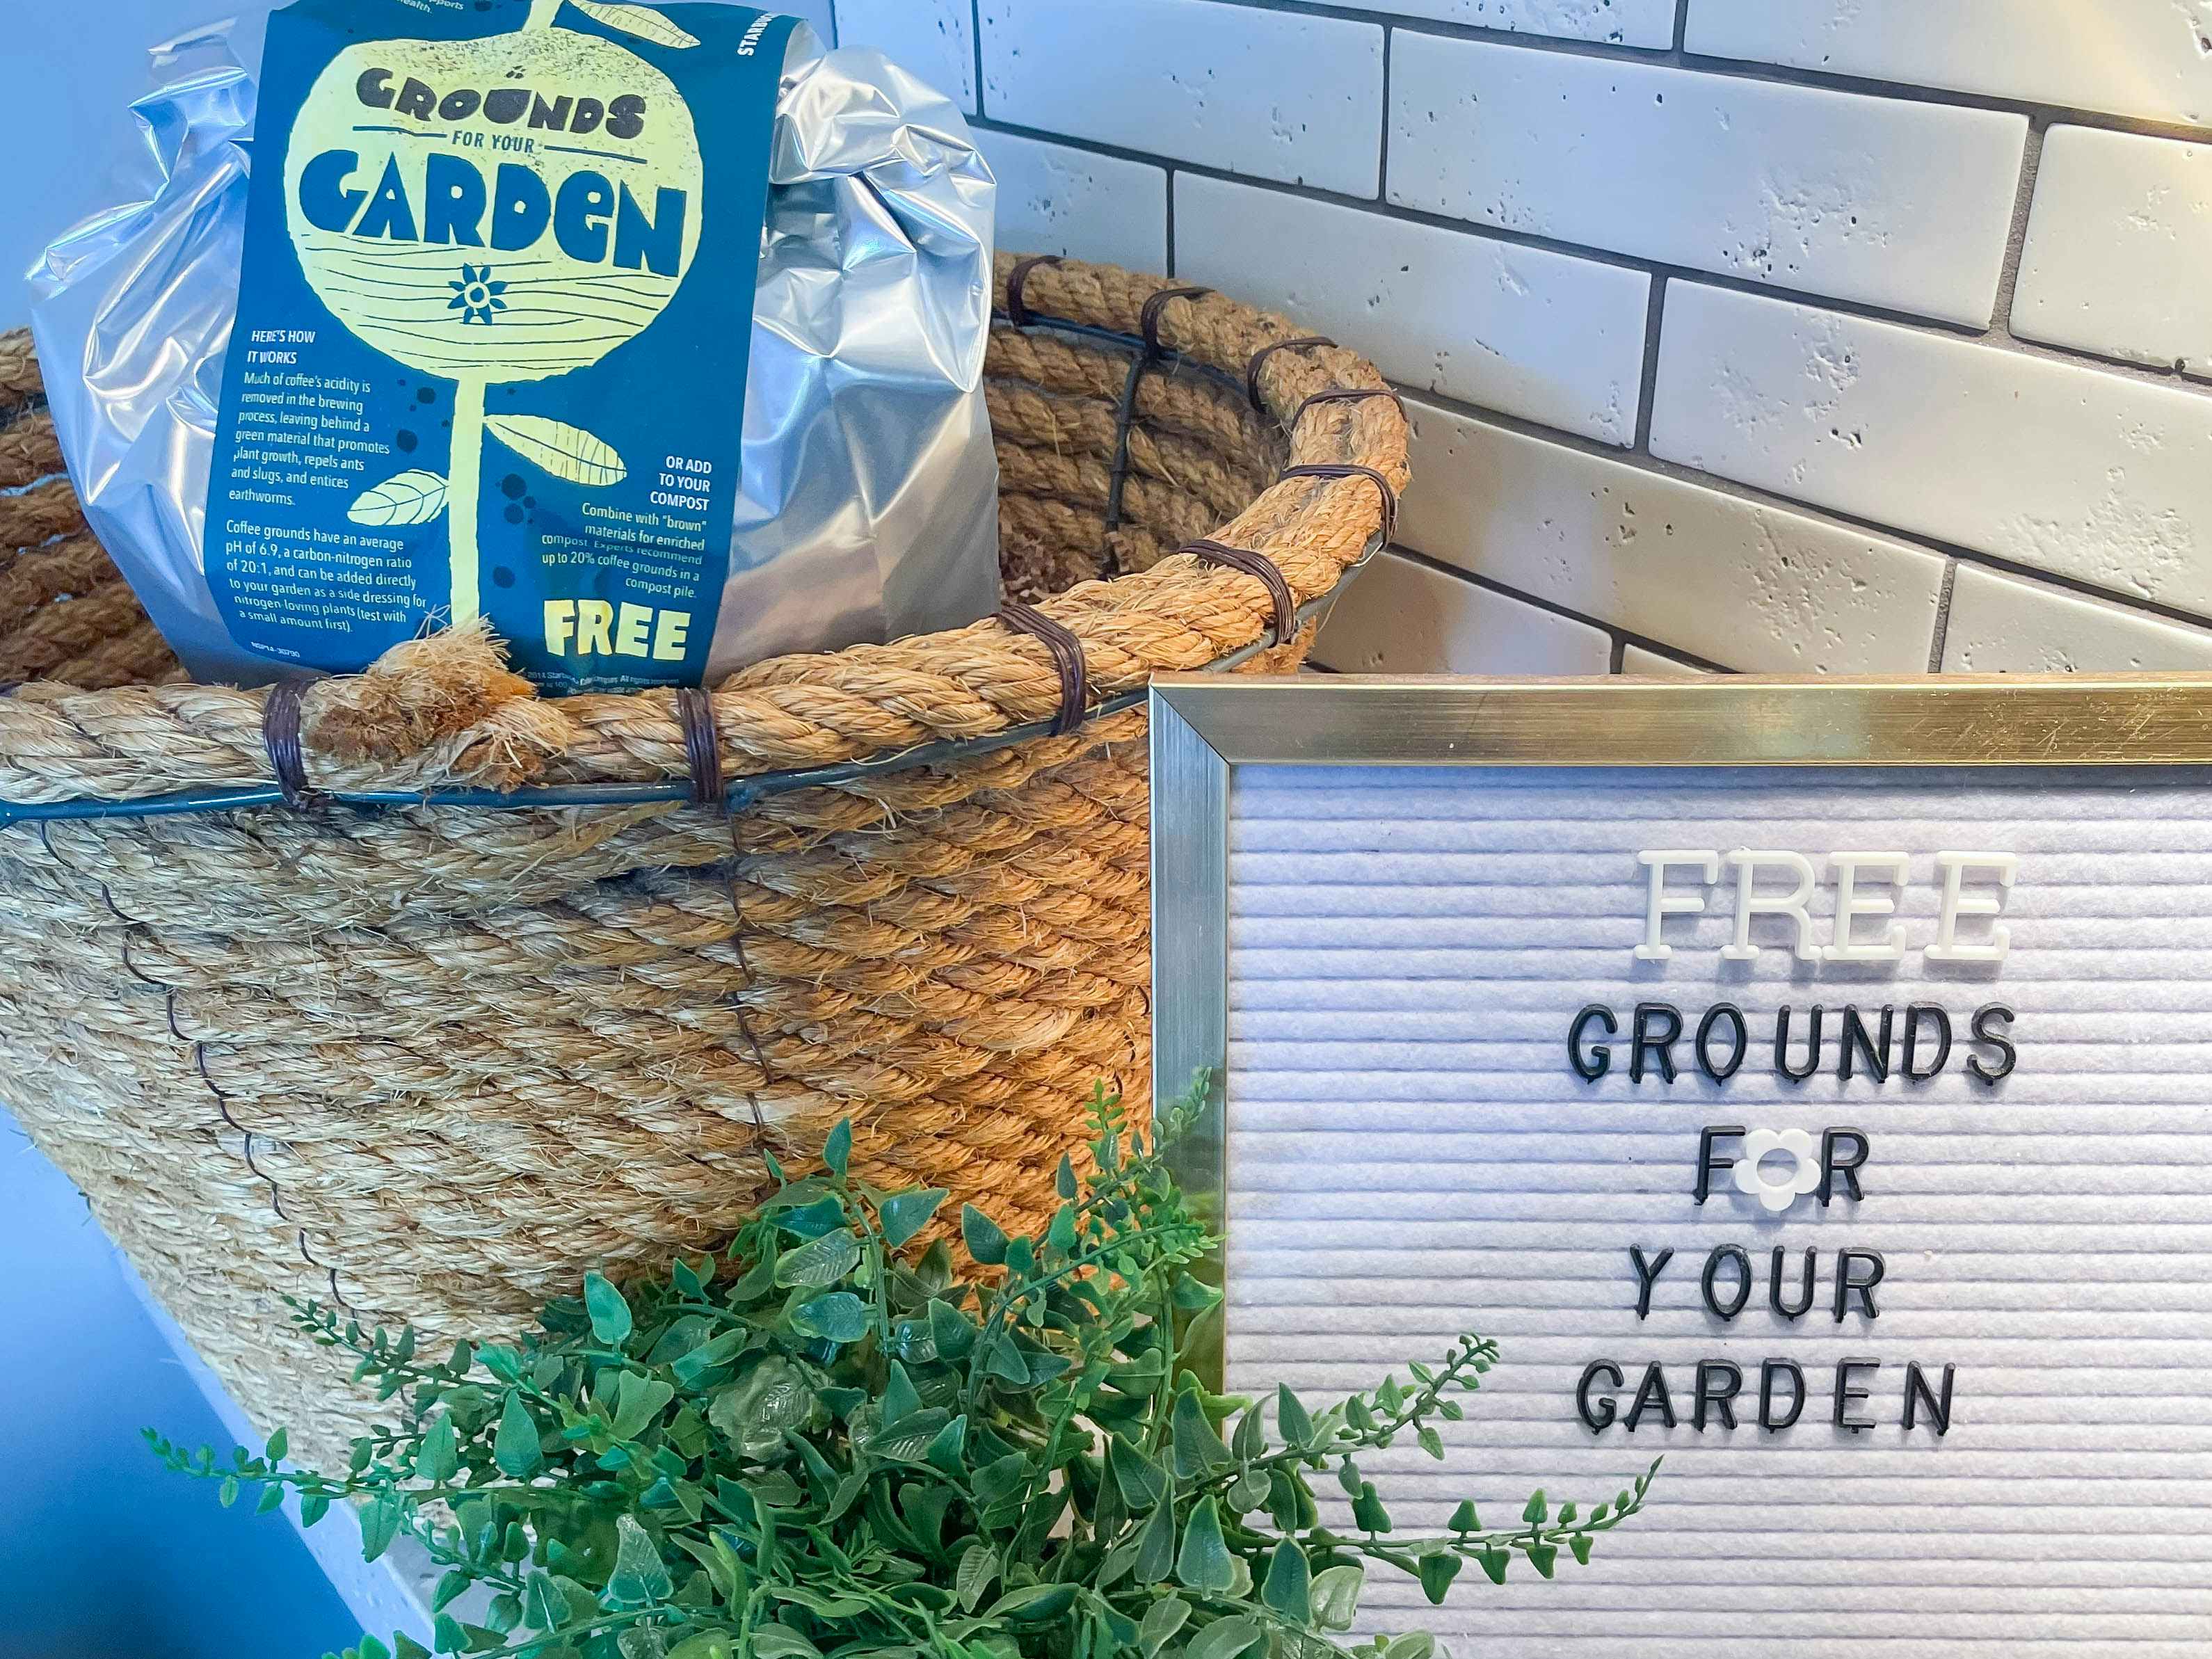 free starbucks coffee grounds for your garden